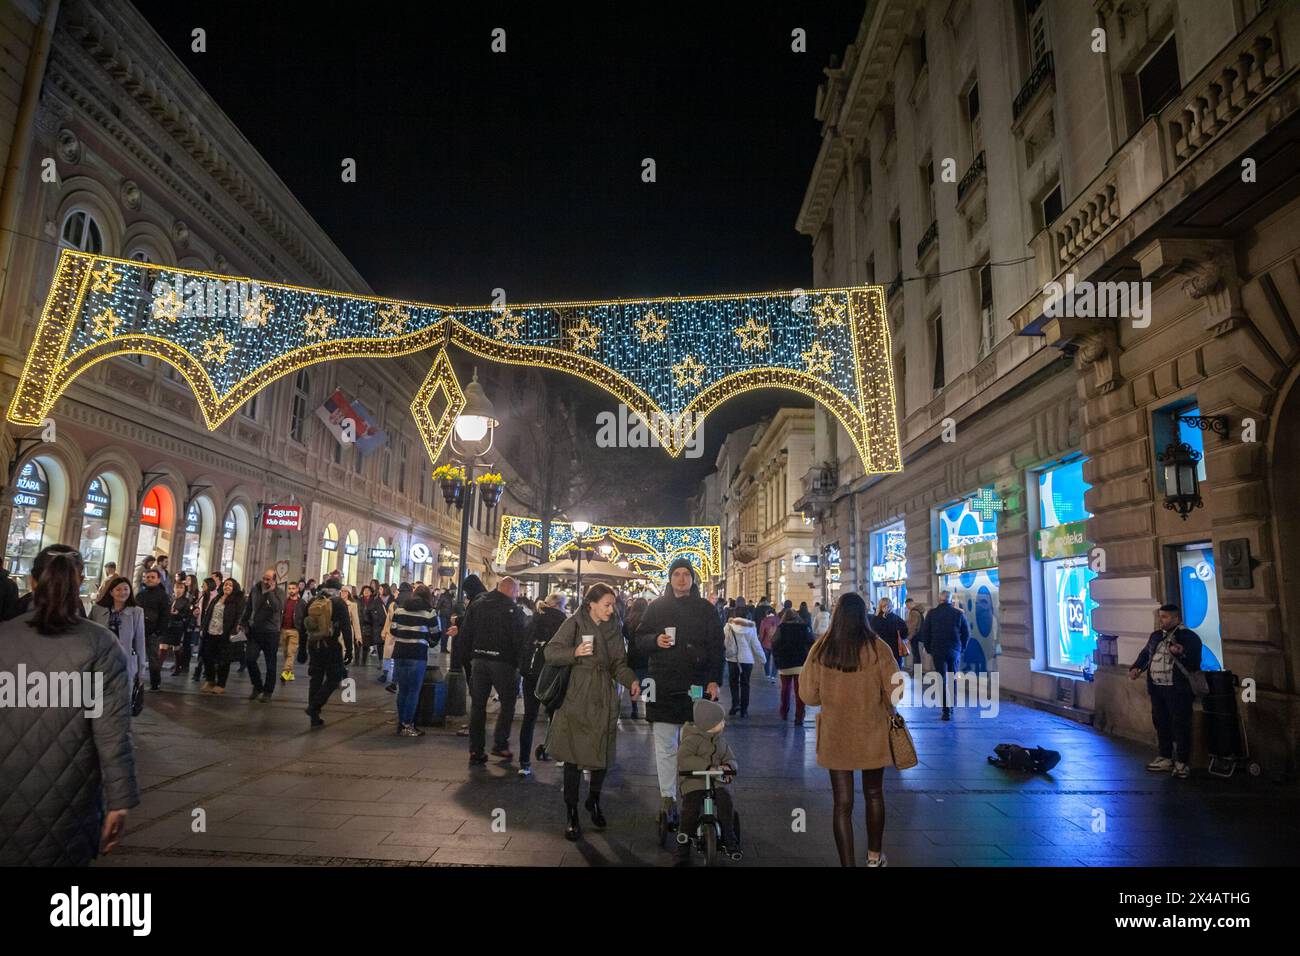 Picture of the Belgrade Christmas decorations on the Kneza Mihailova (knez mihailo) street at night with a crowd of pedestrians walking, in Belgrade, Stock Photo